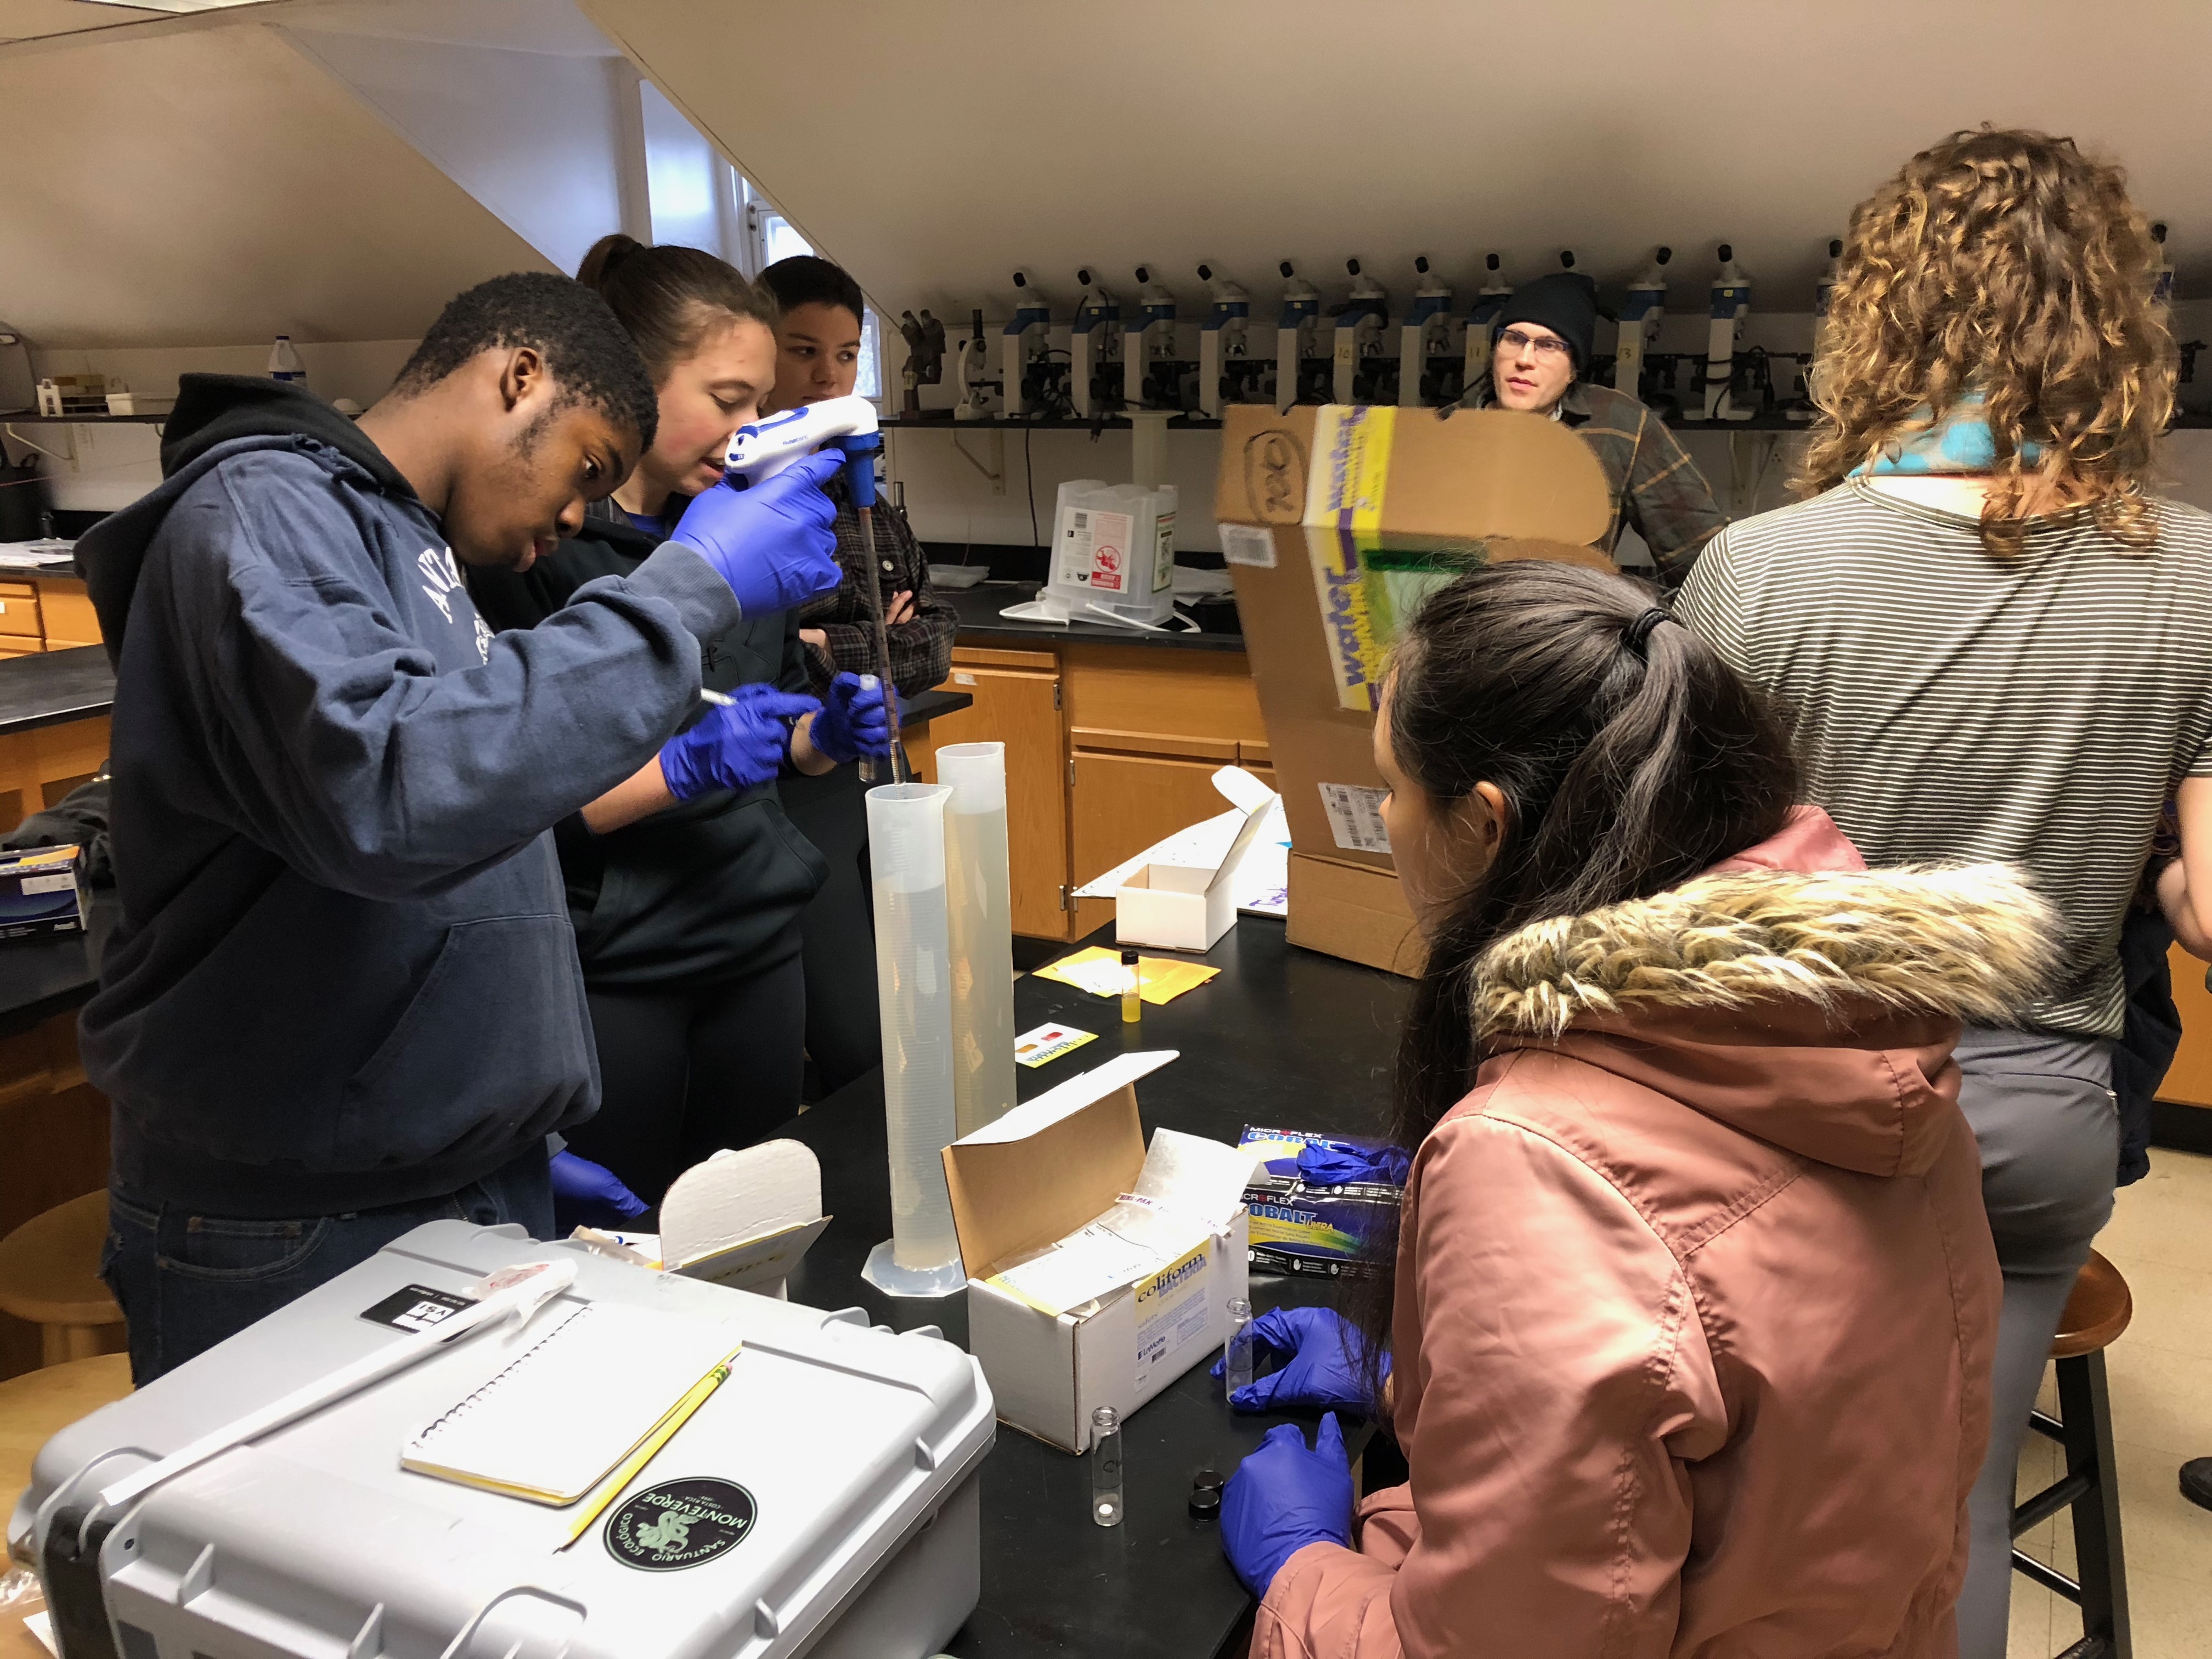 Penn undergrads and PWD Watershed Stewards conducting water quality testing at the Cobbs Creek Environmental Education Center